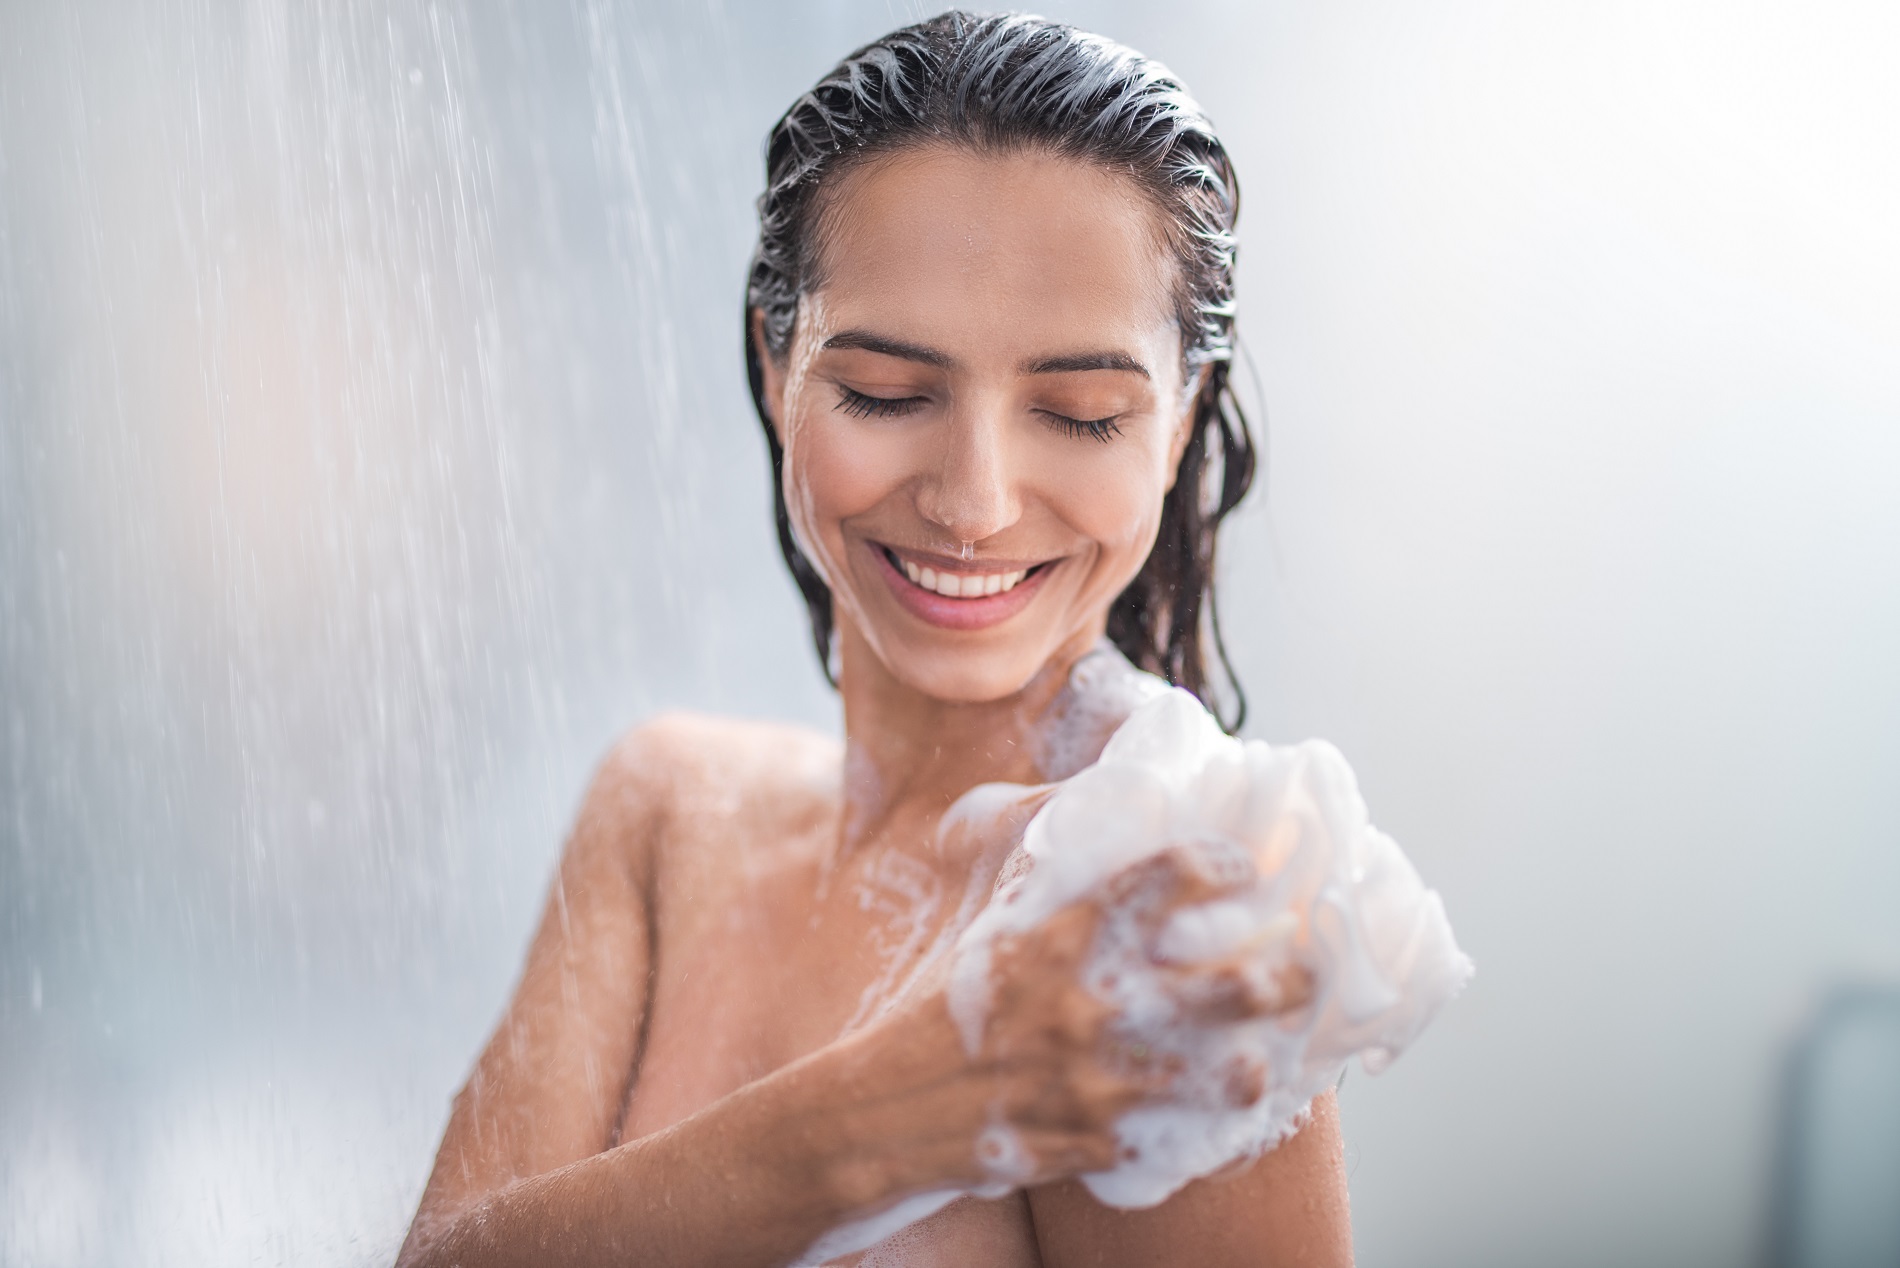 8 mistakes most of us make in the shower